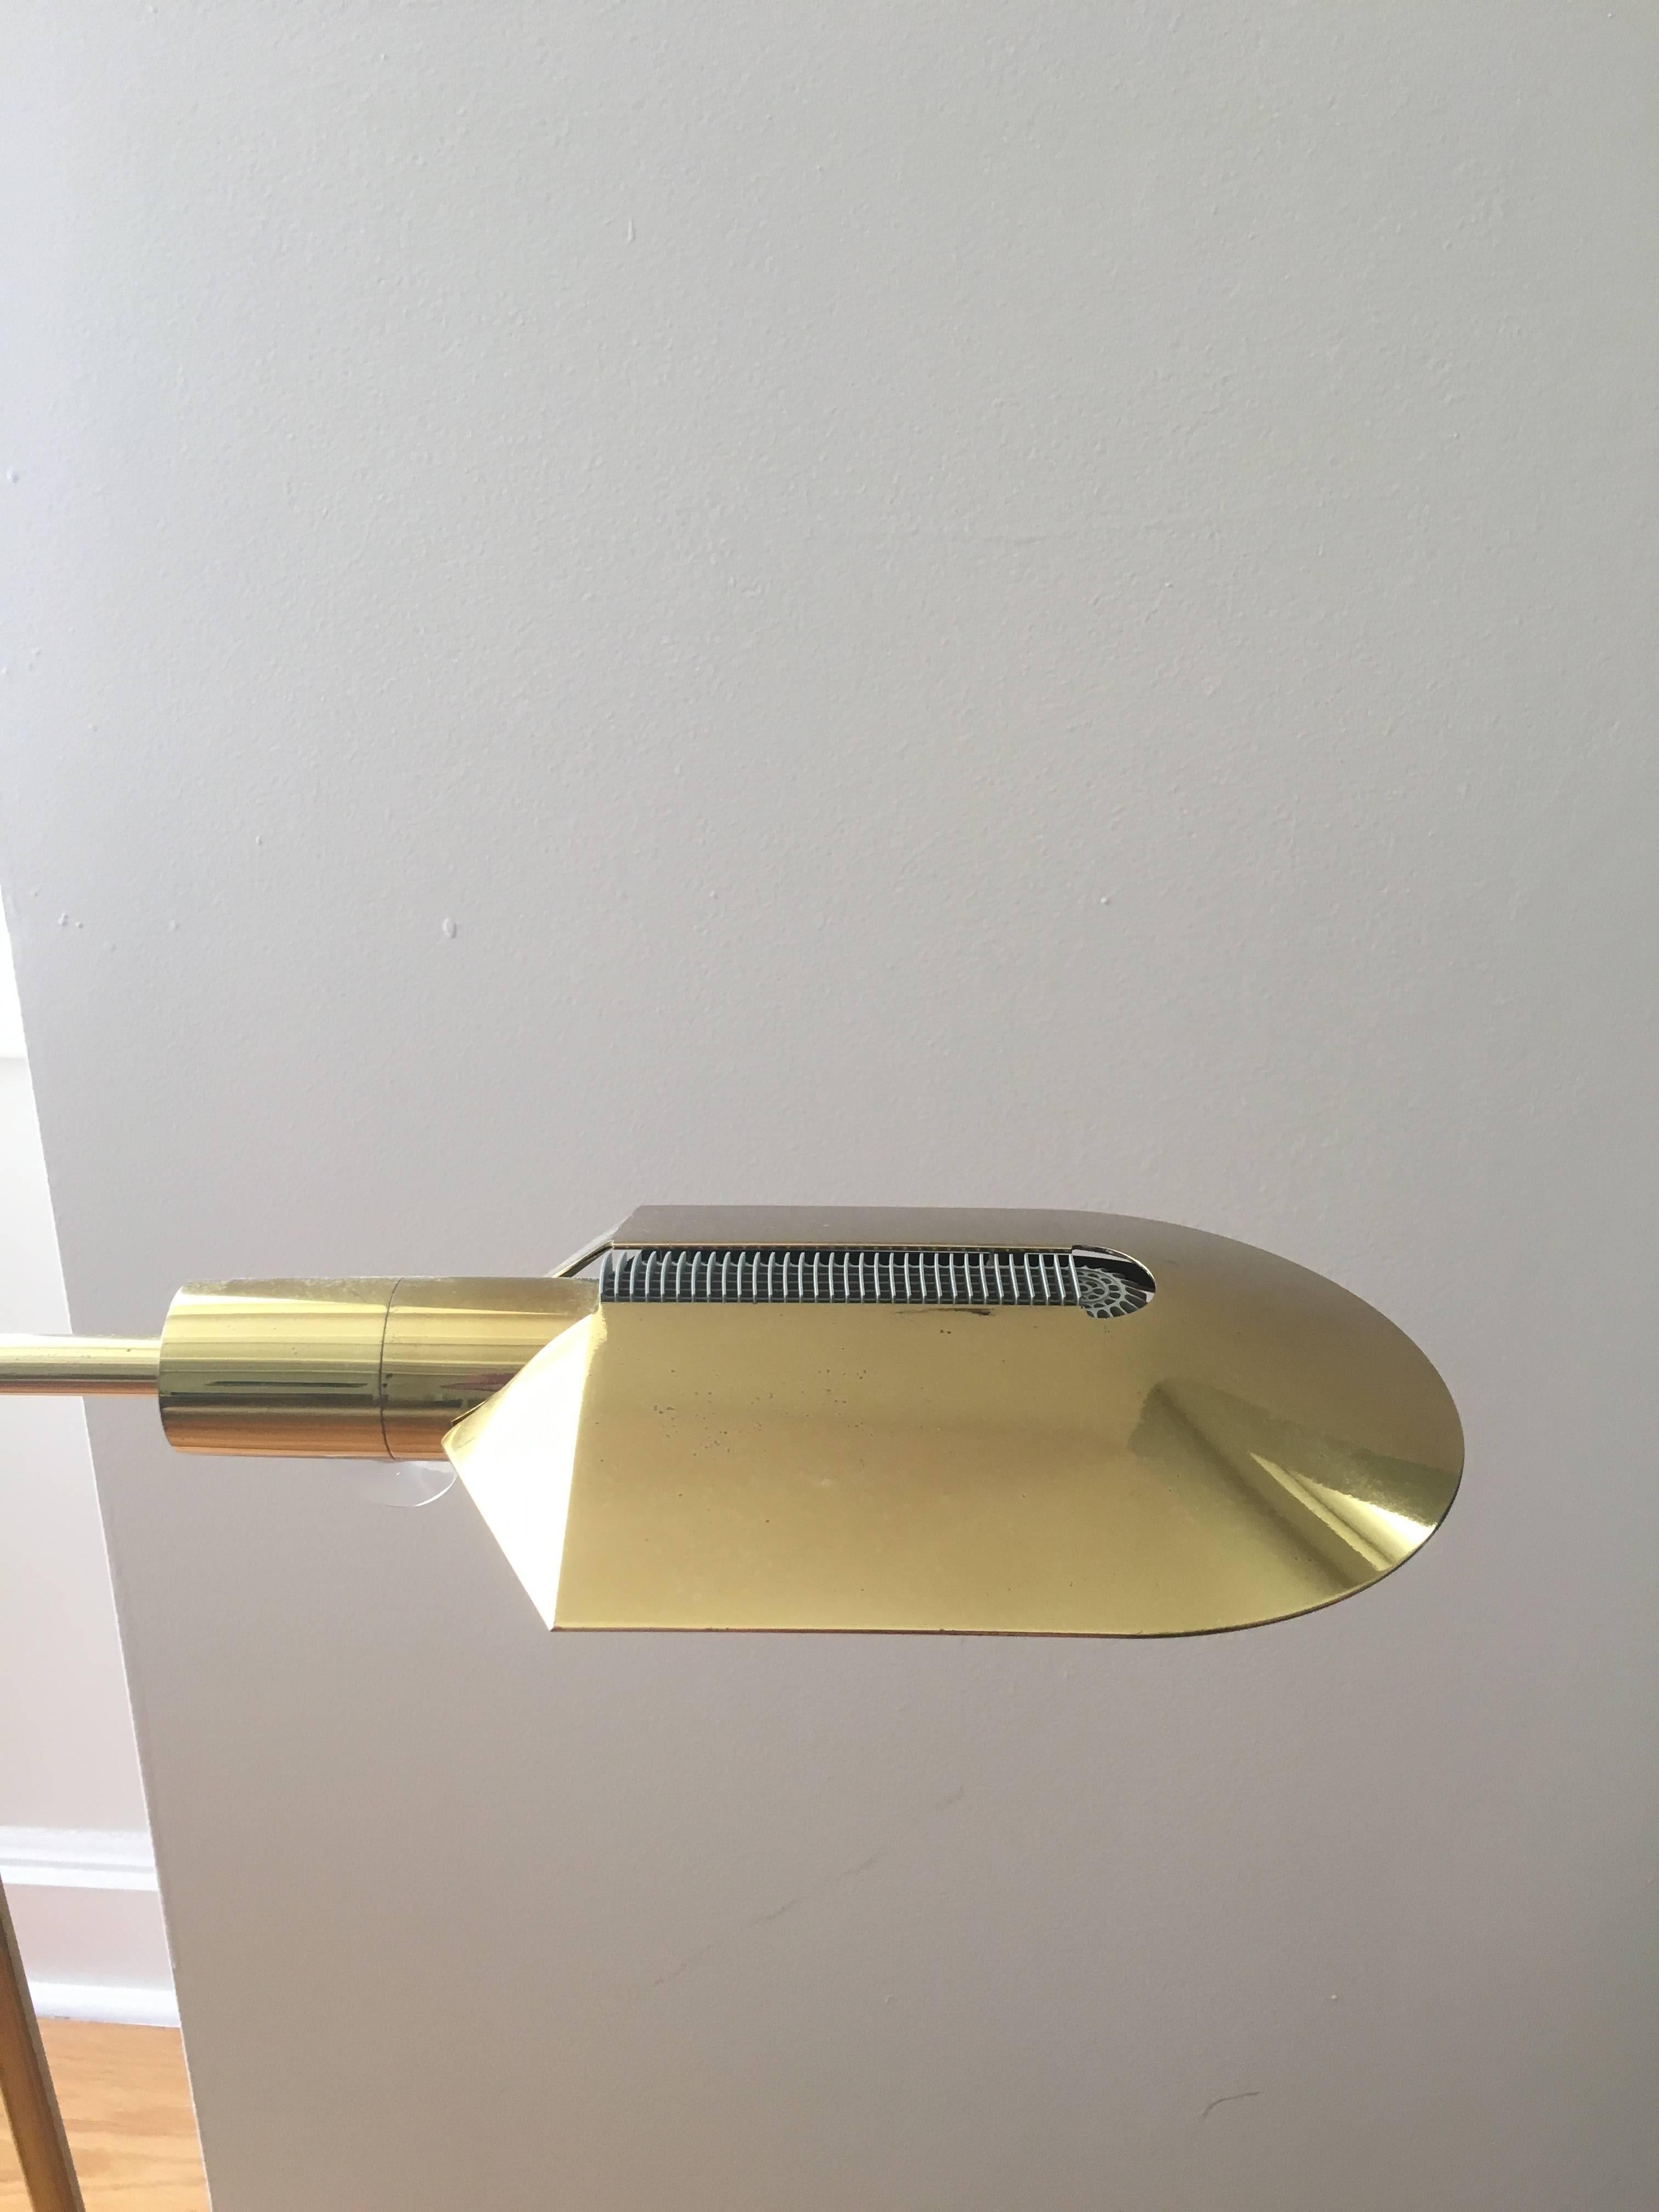 Cedric Hartman 1970s adjustable reading lamp of rare form; lacquered brass, galvanized steel, original Lucite knob. Signed and stamped to the underside in steel. 

Three lamps available, priced individually. 